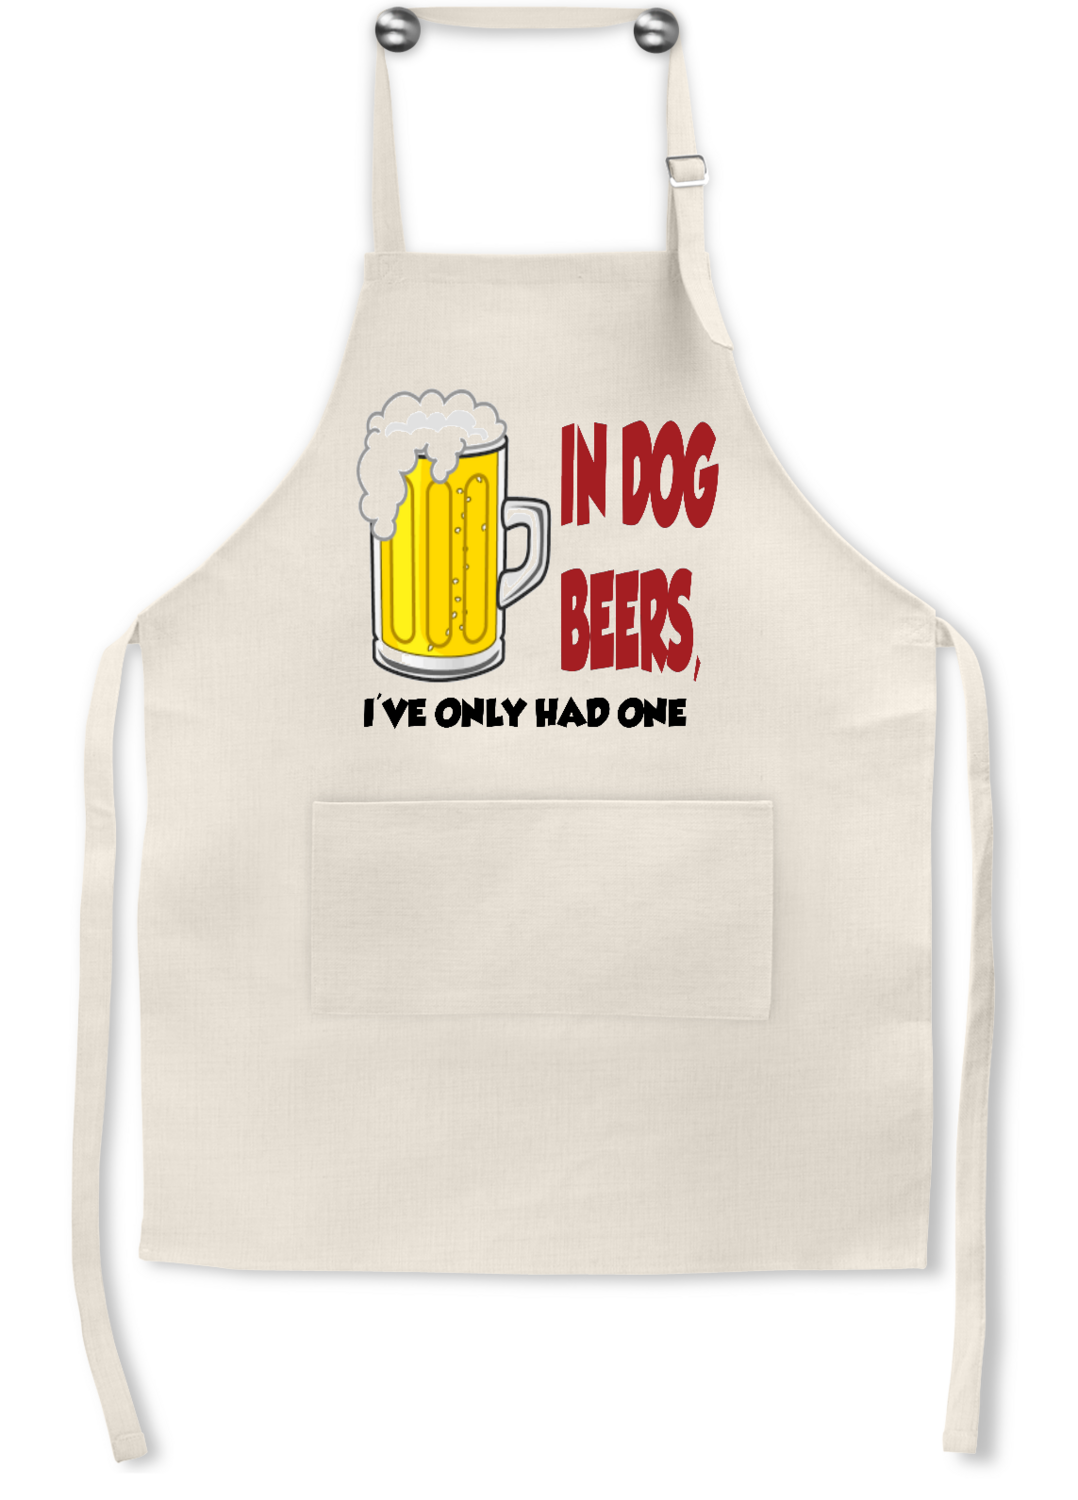 Dog Apron: IN DOG BEERS, I'VE ONLY HAD ONE